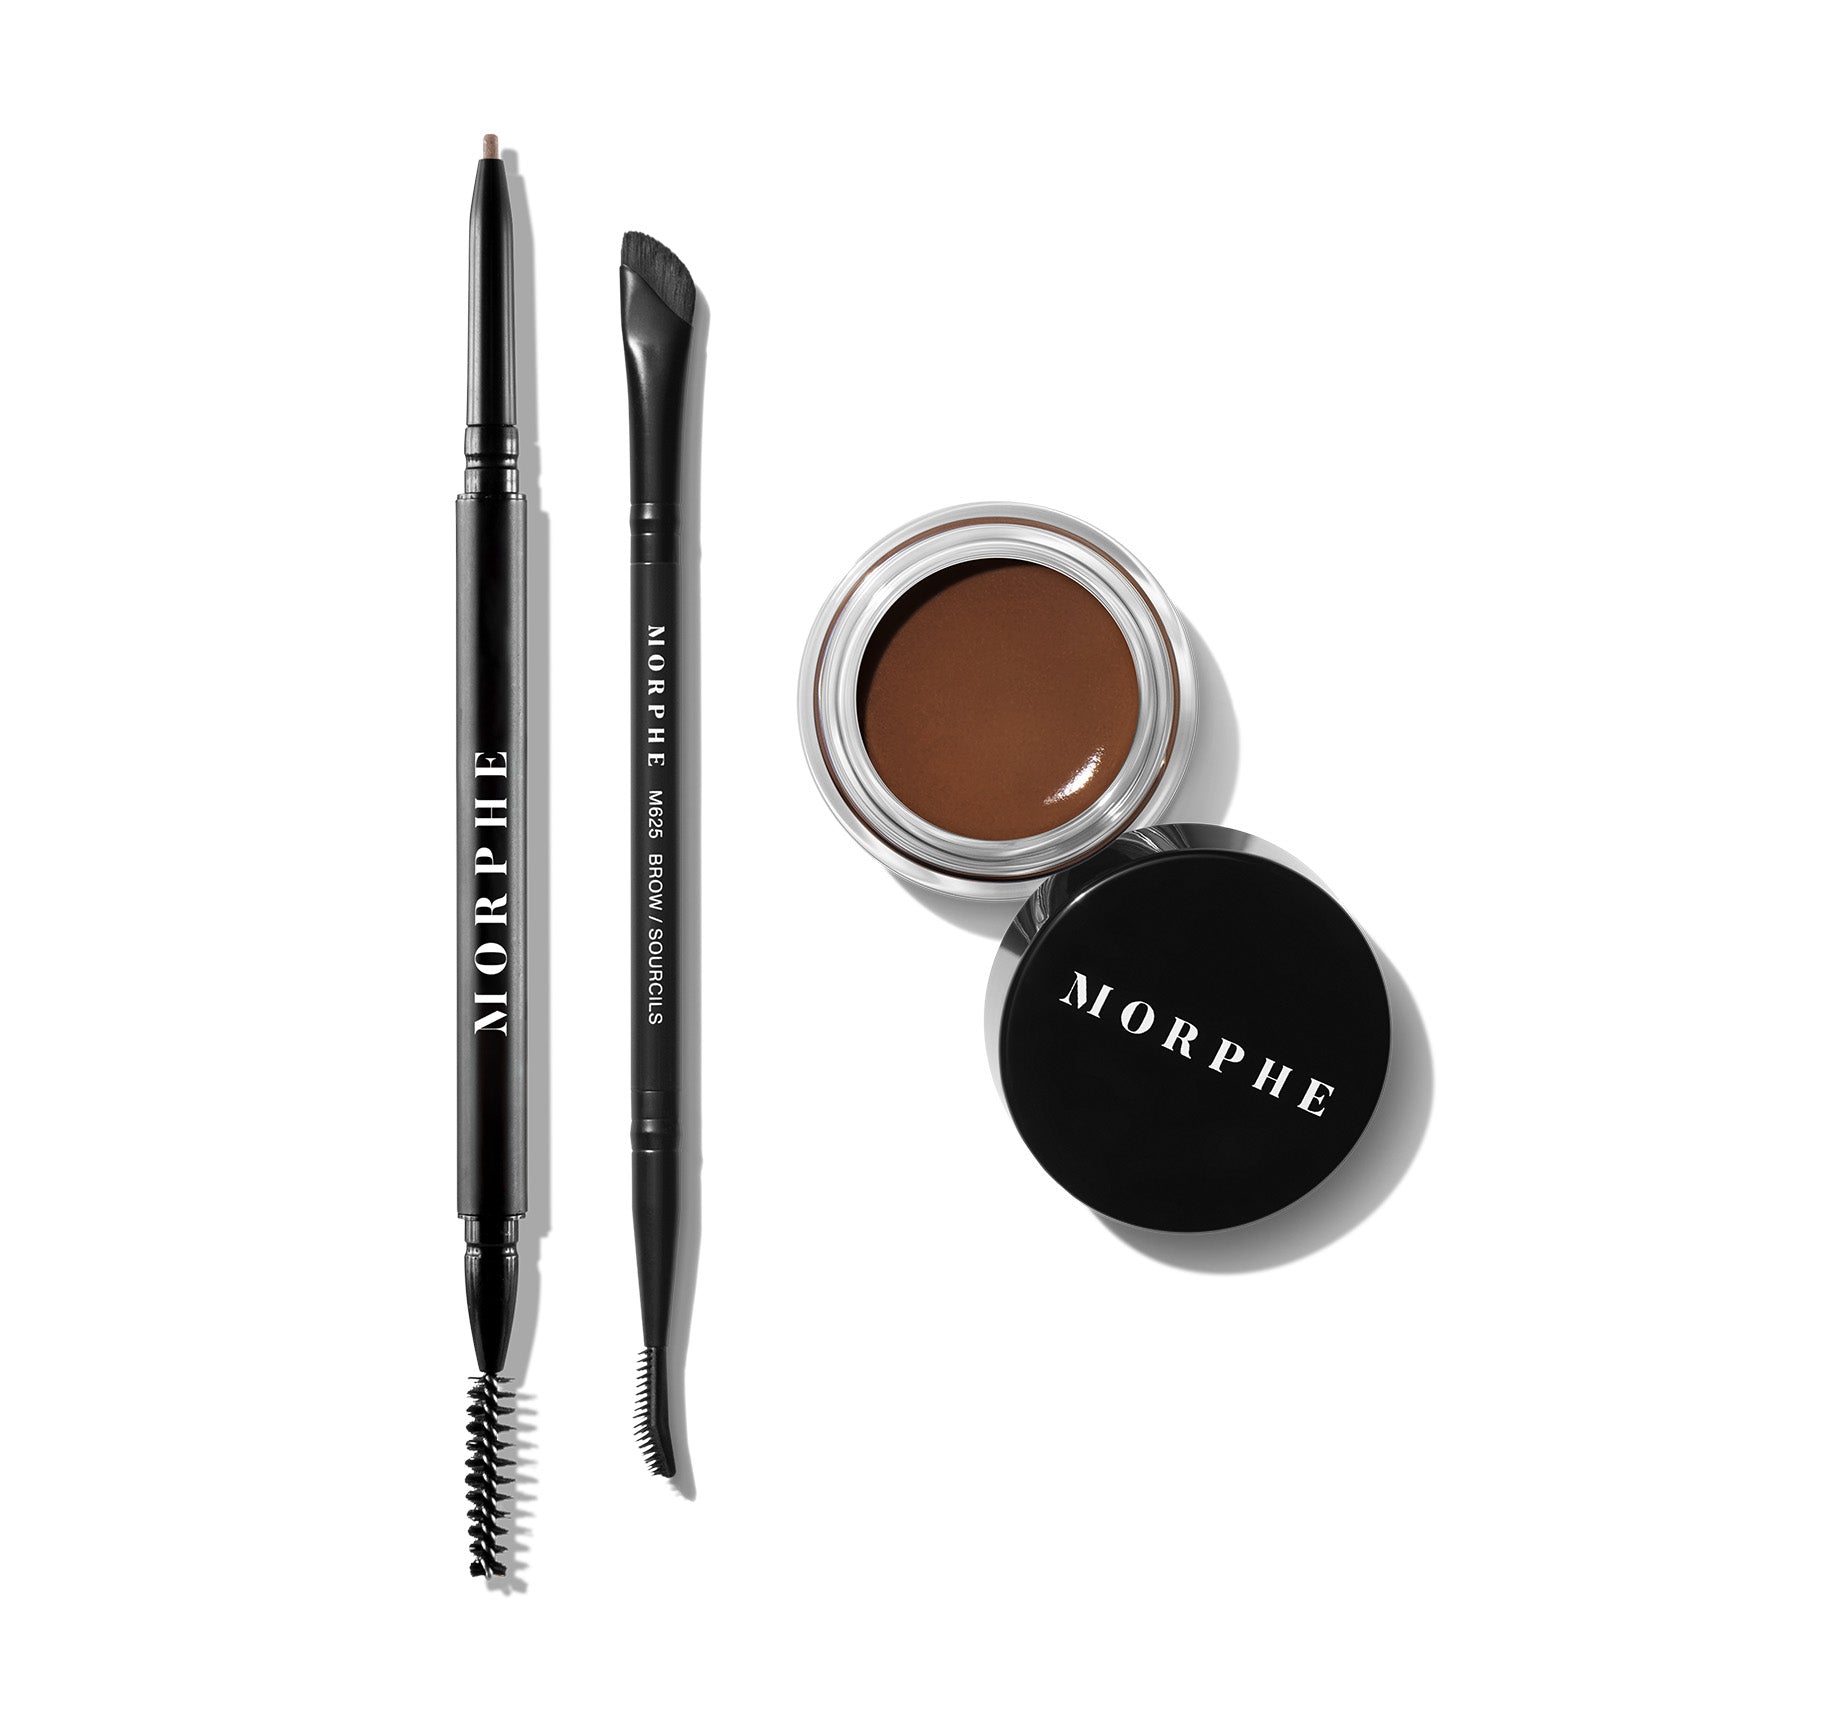 High Archiever Everyday Essentials Brow Kit - Latte - Image 9